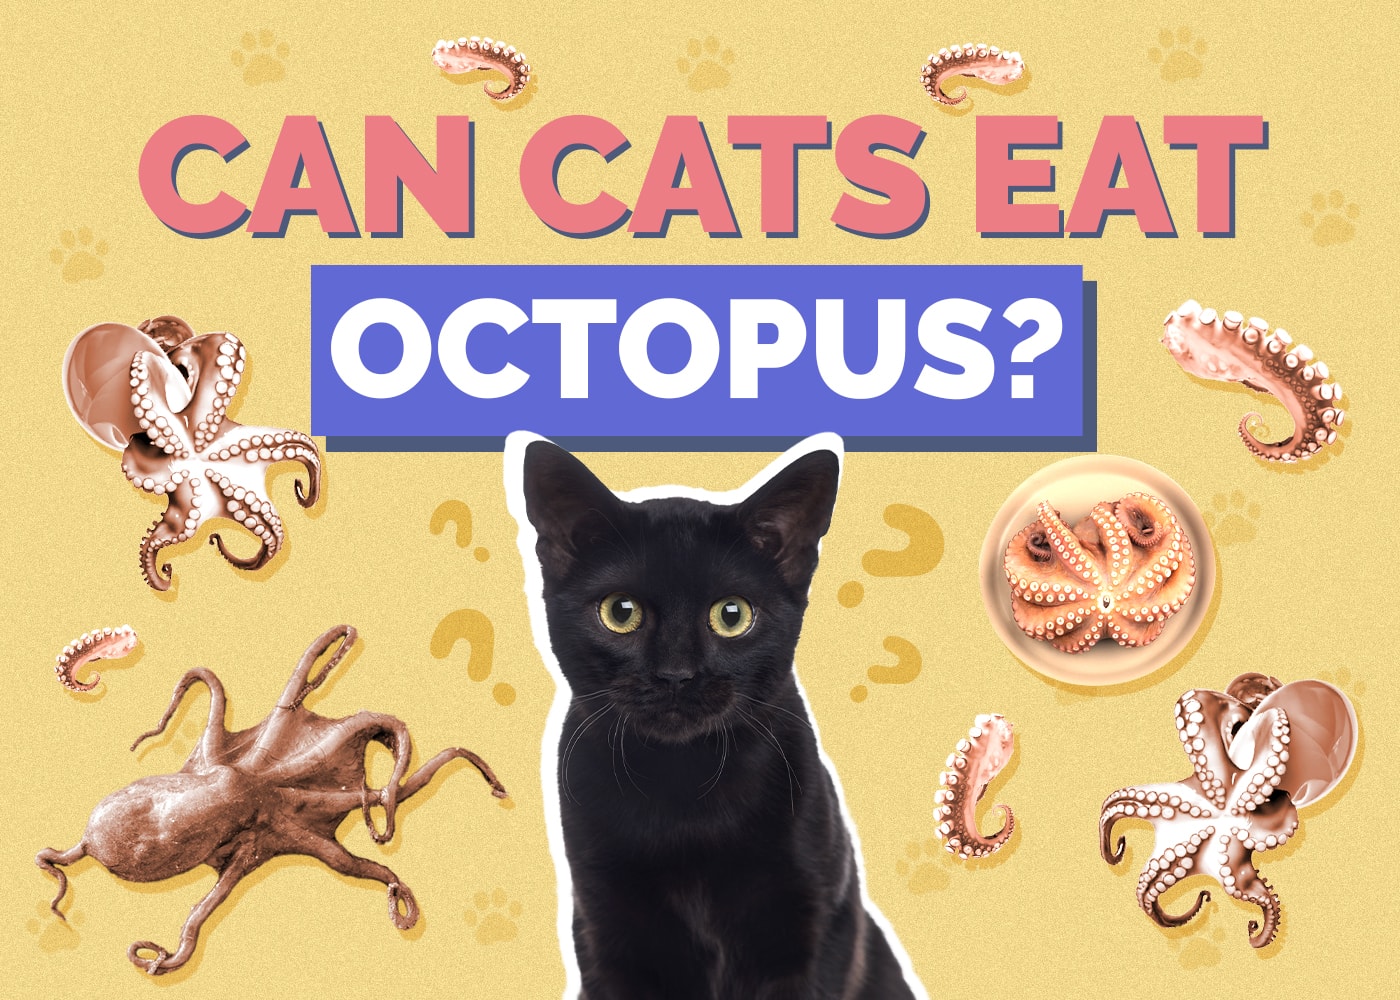 Can Cats Eat octopus